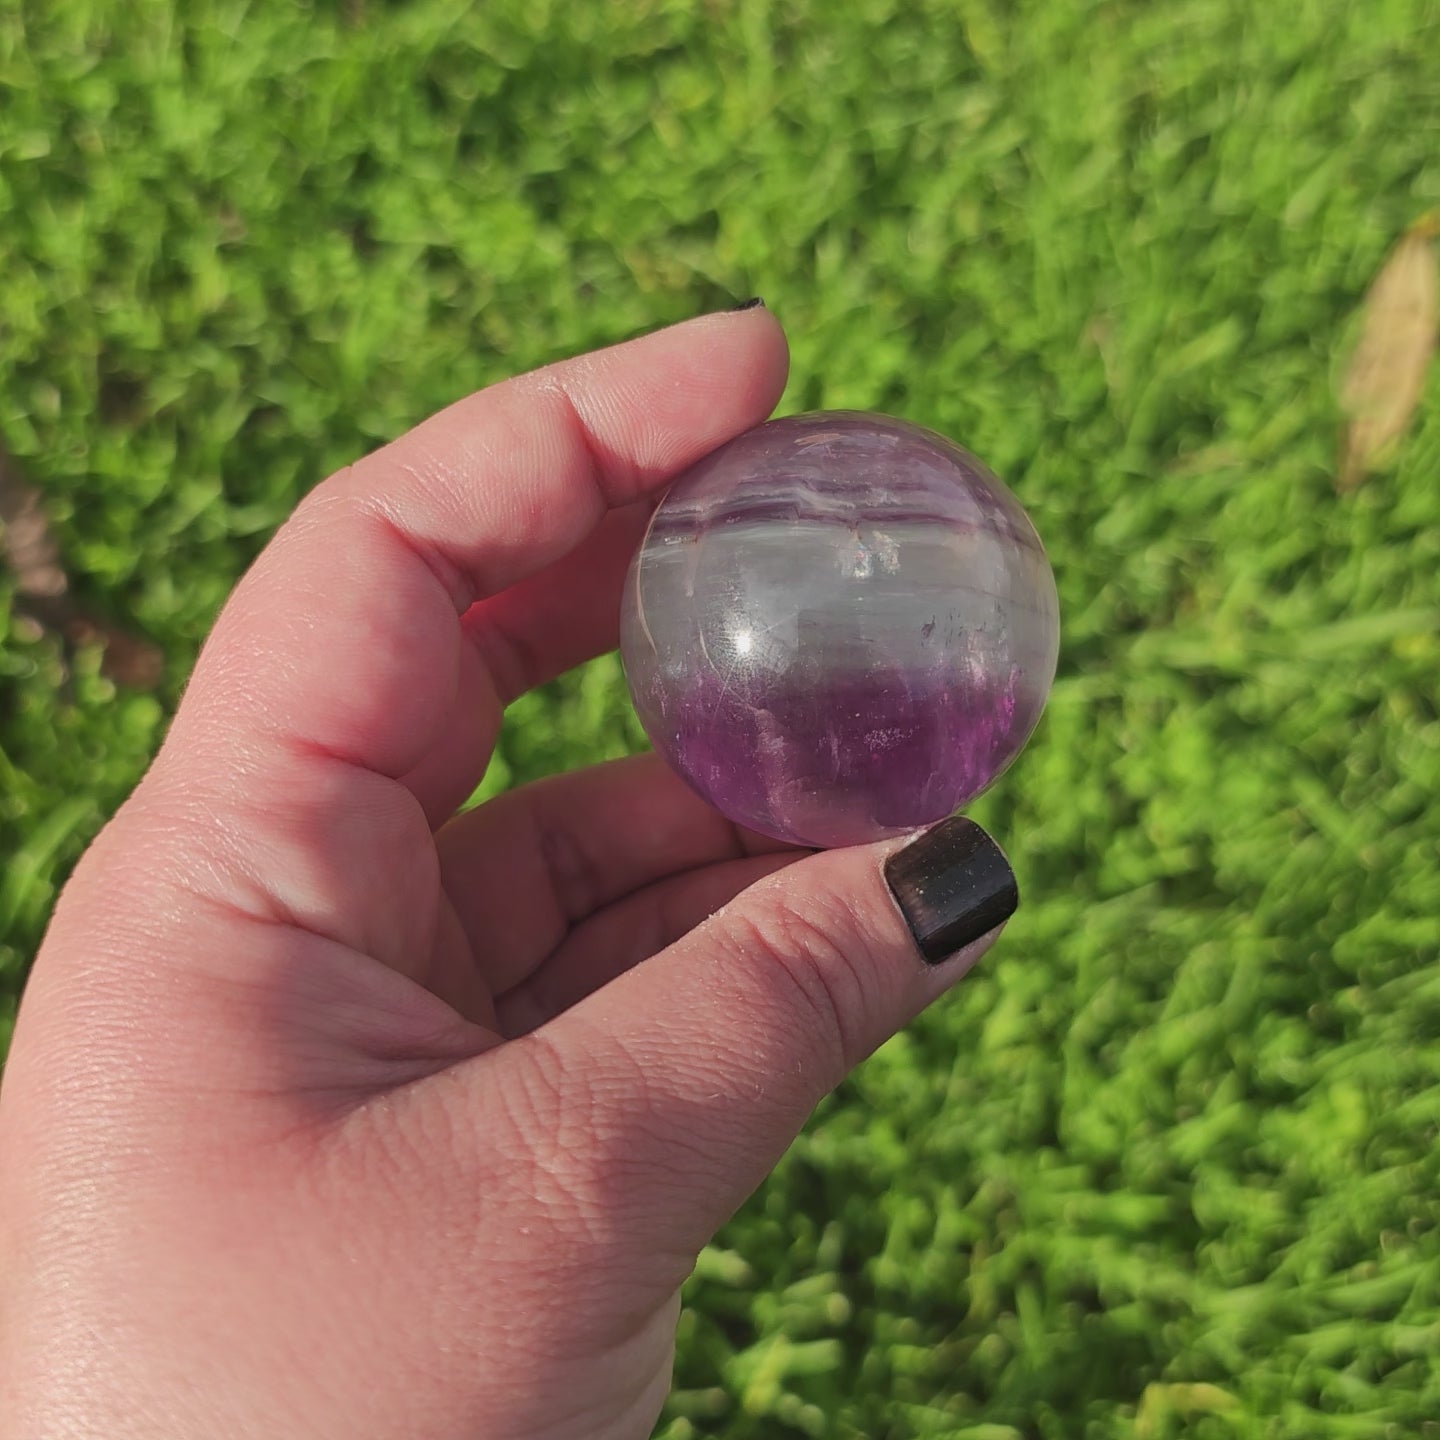 Fluorite Sphere, Alter Crystal, Birthday Gift, Anniversary Gifts, Girlfriend, Gifts for Friend, Boho, Minimalist, Gemstone, Crystal, Crystal Healing, home decor, australia crystal, collectors crystal